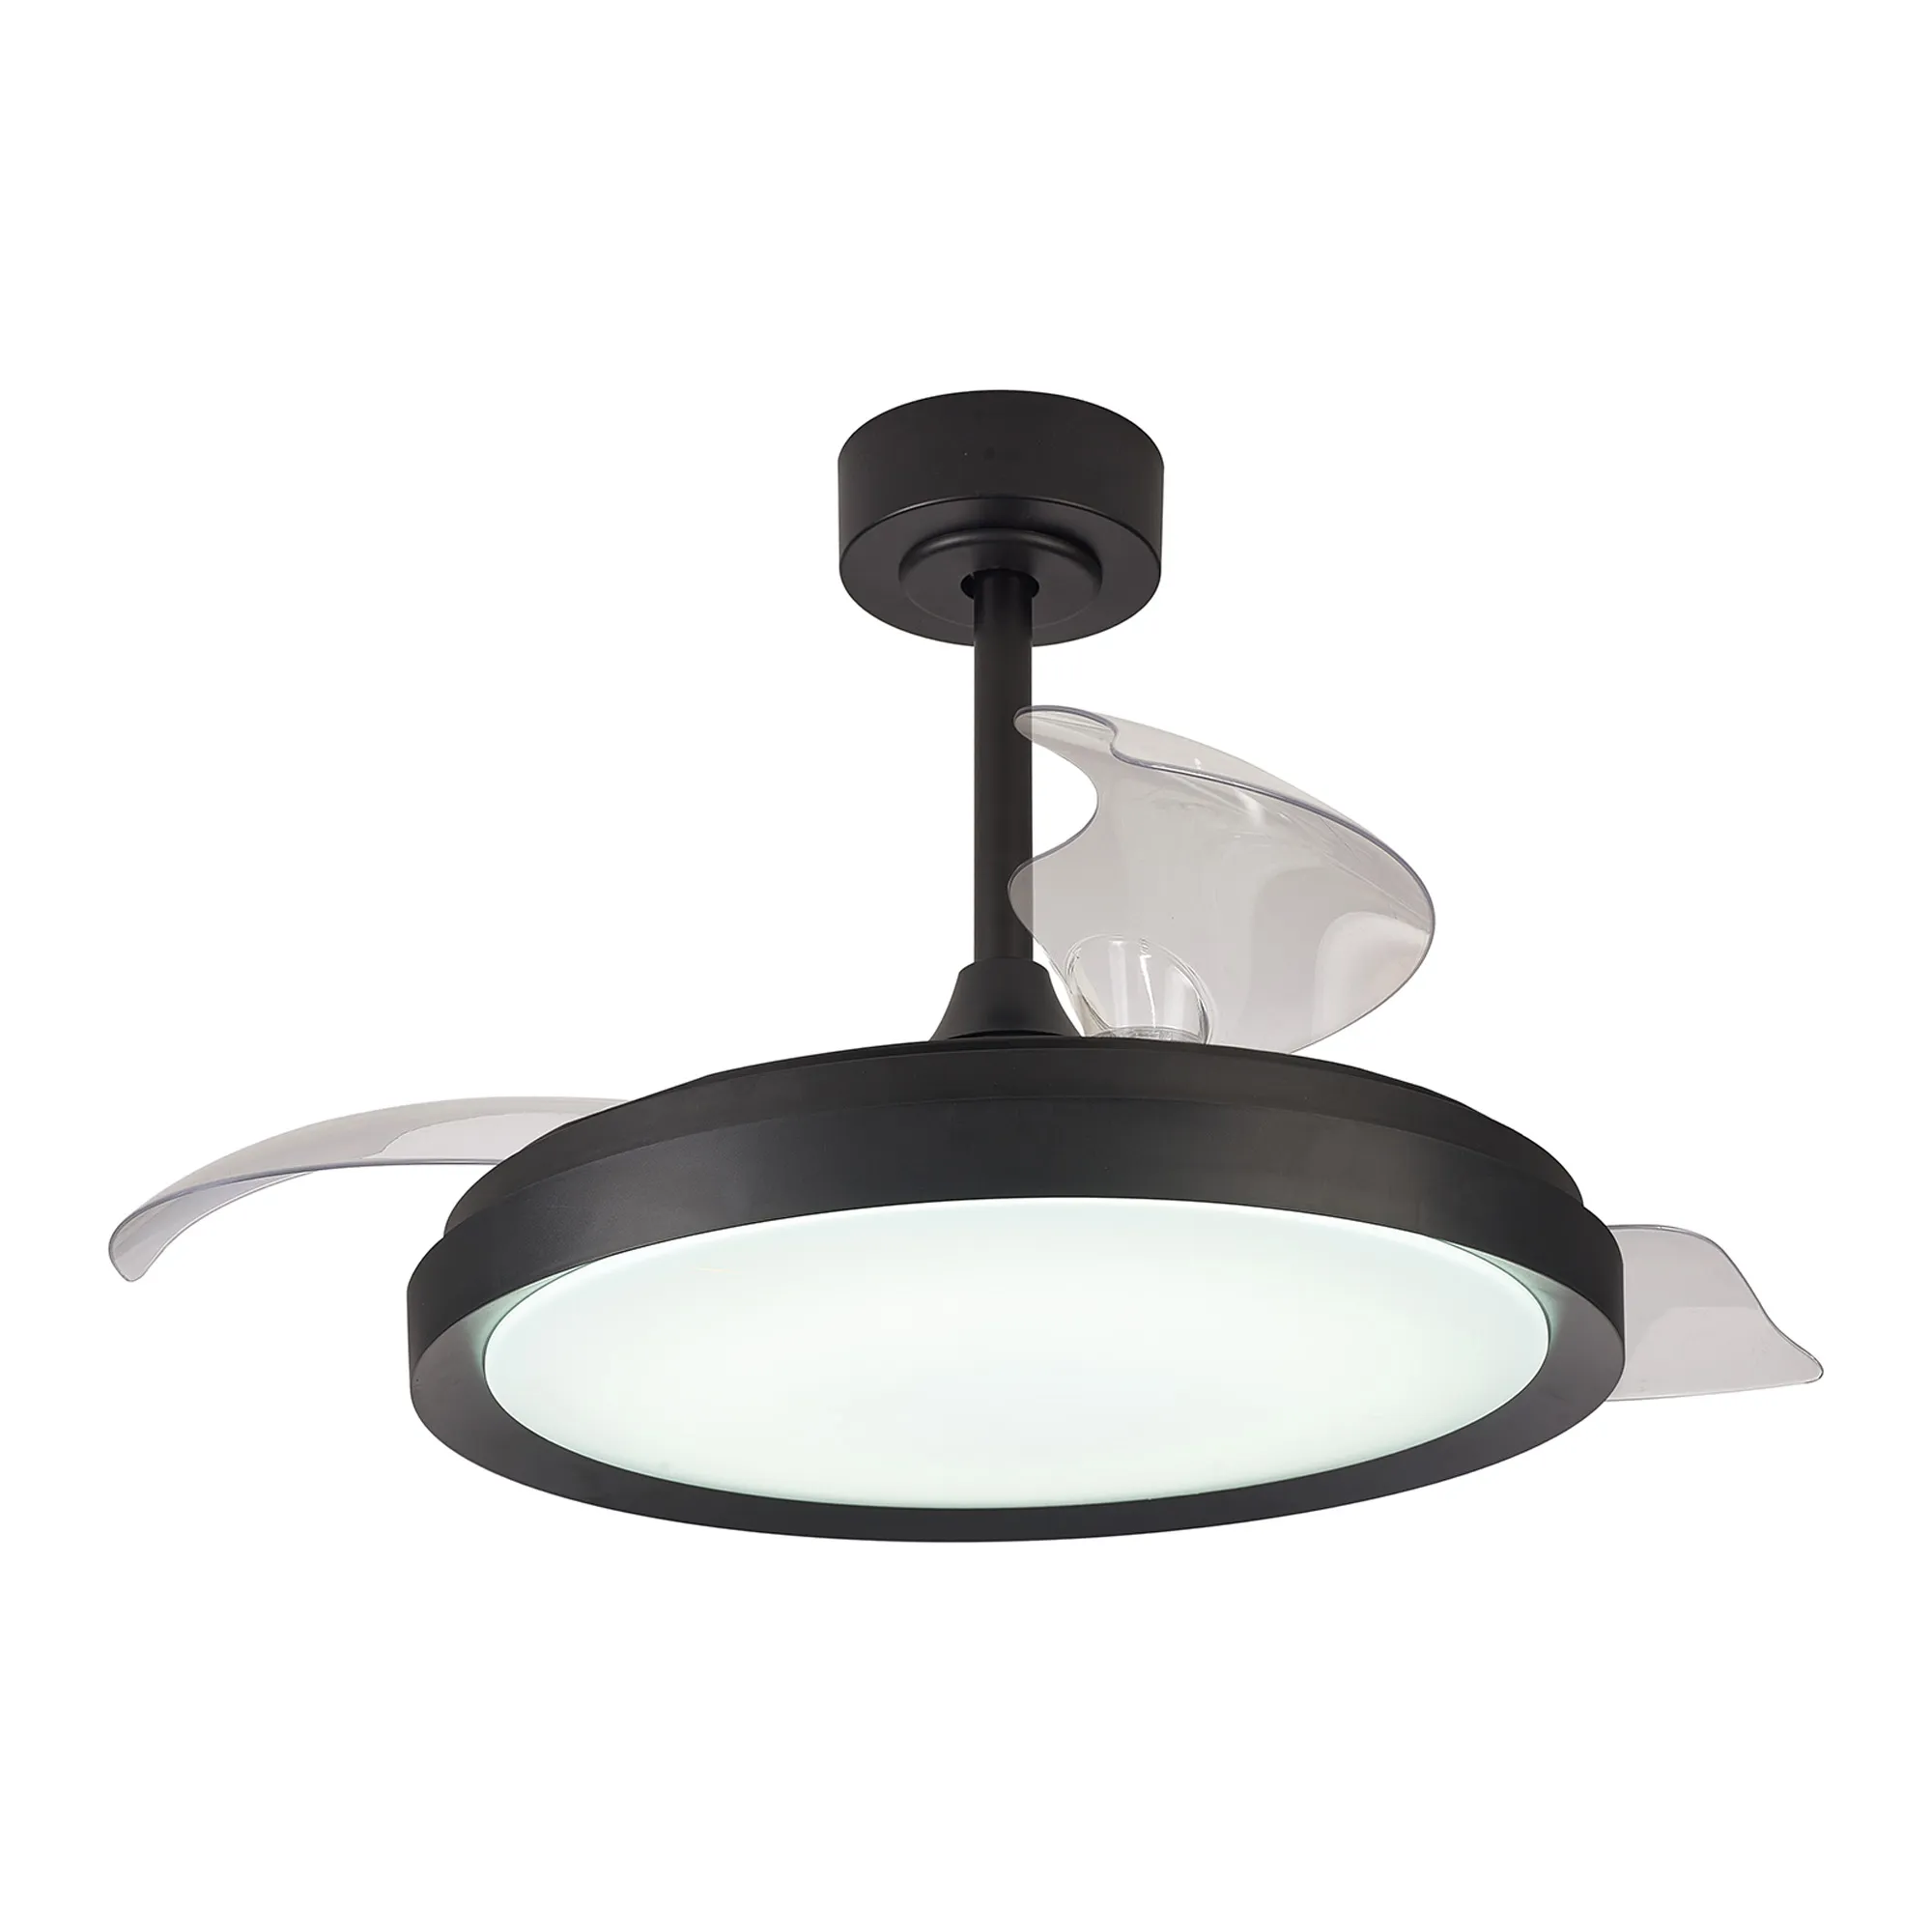 M8828  Mistral 50W LED Dimmable Ceiling Light With Built-In 28W DC Fan; 2700-5000K Remote Control; Black